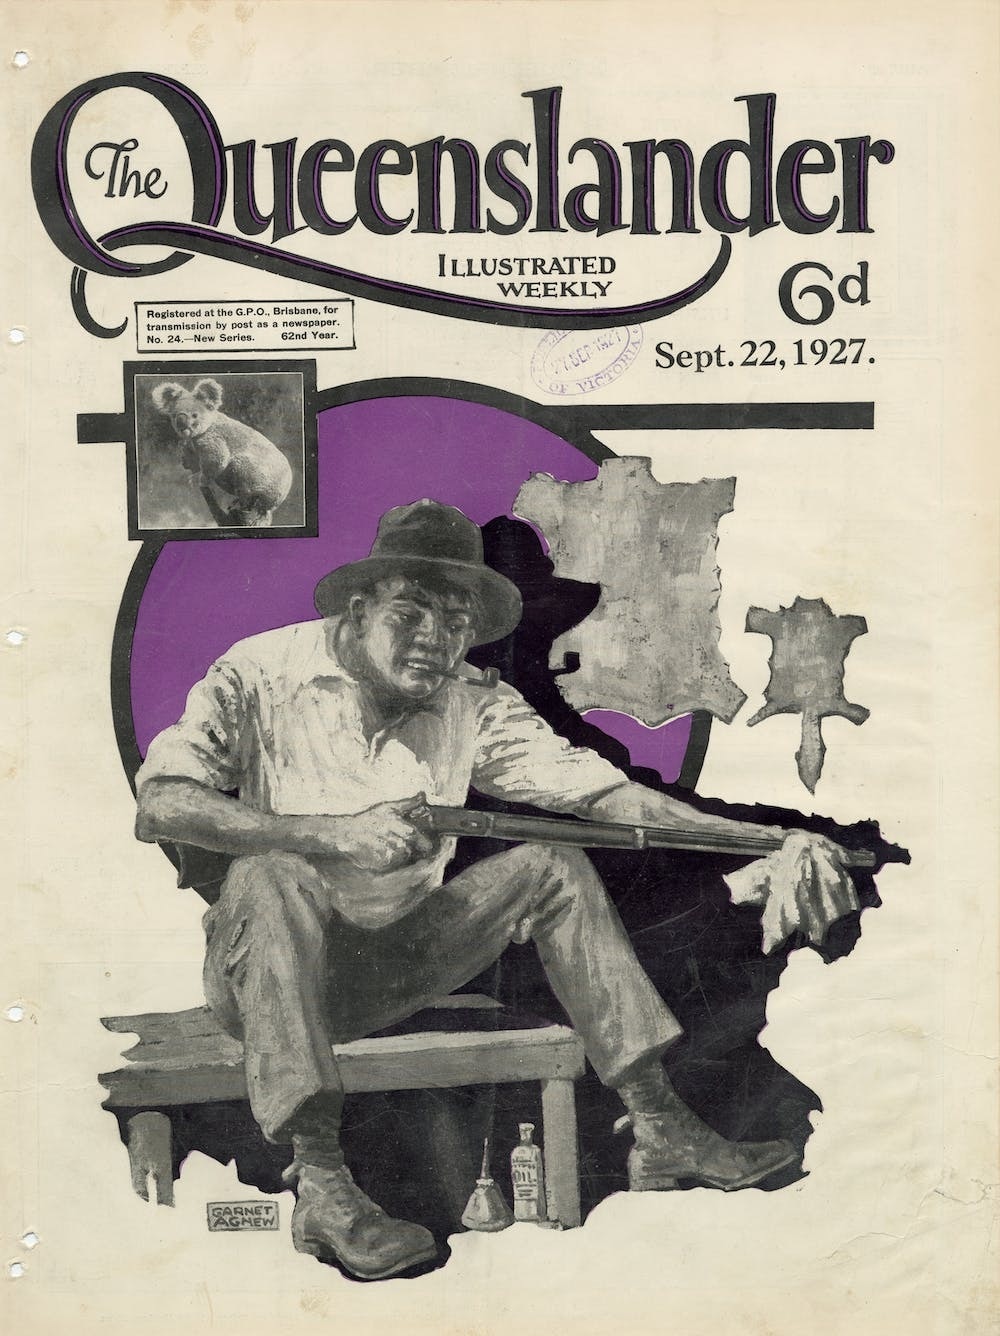 a magazine cover with an illustration of a man cleaning a rifle and a koala